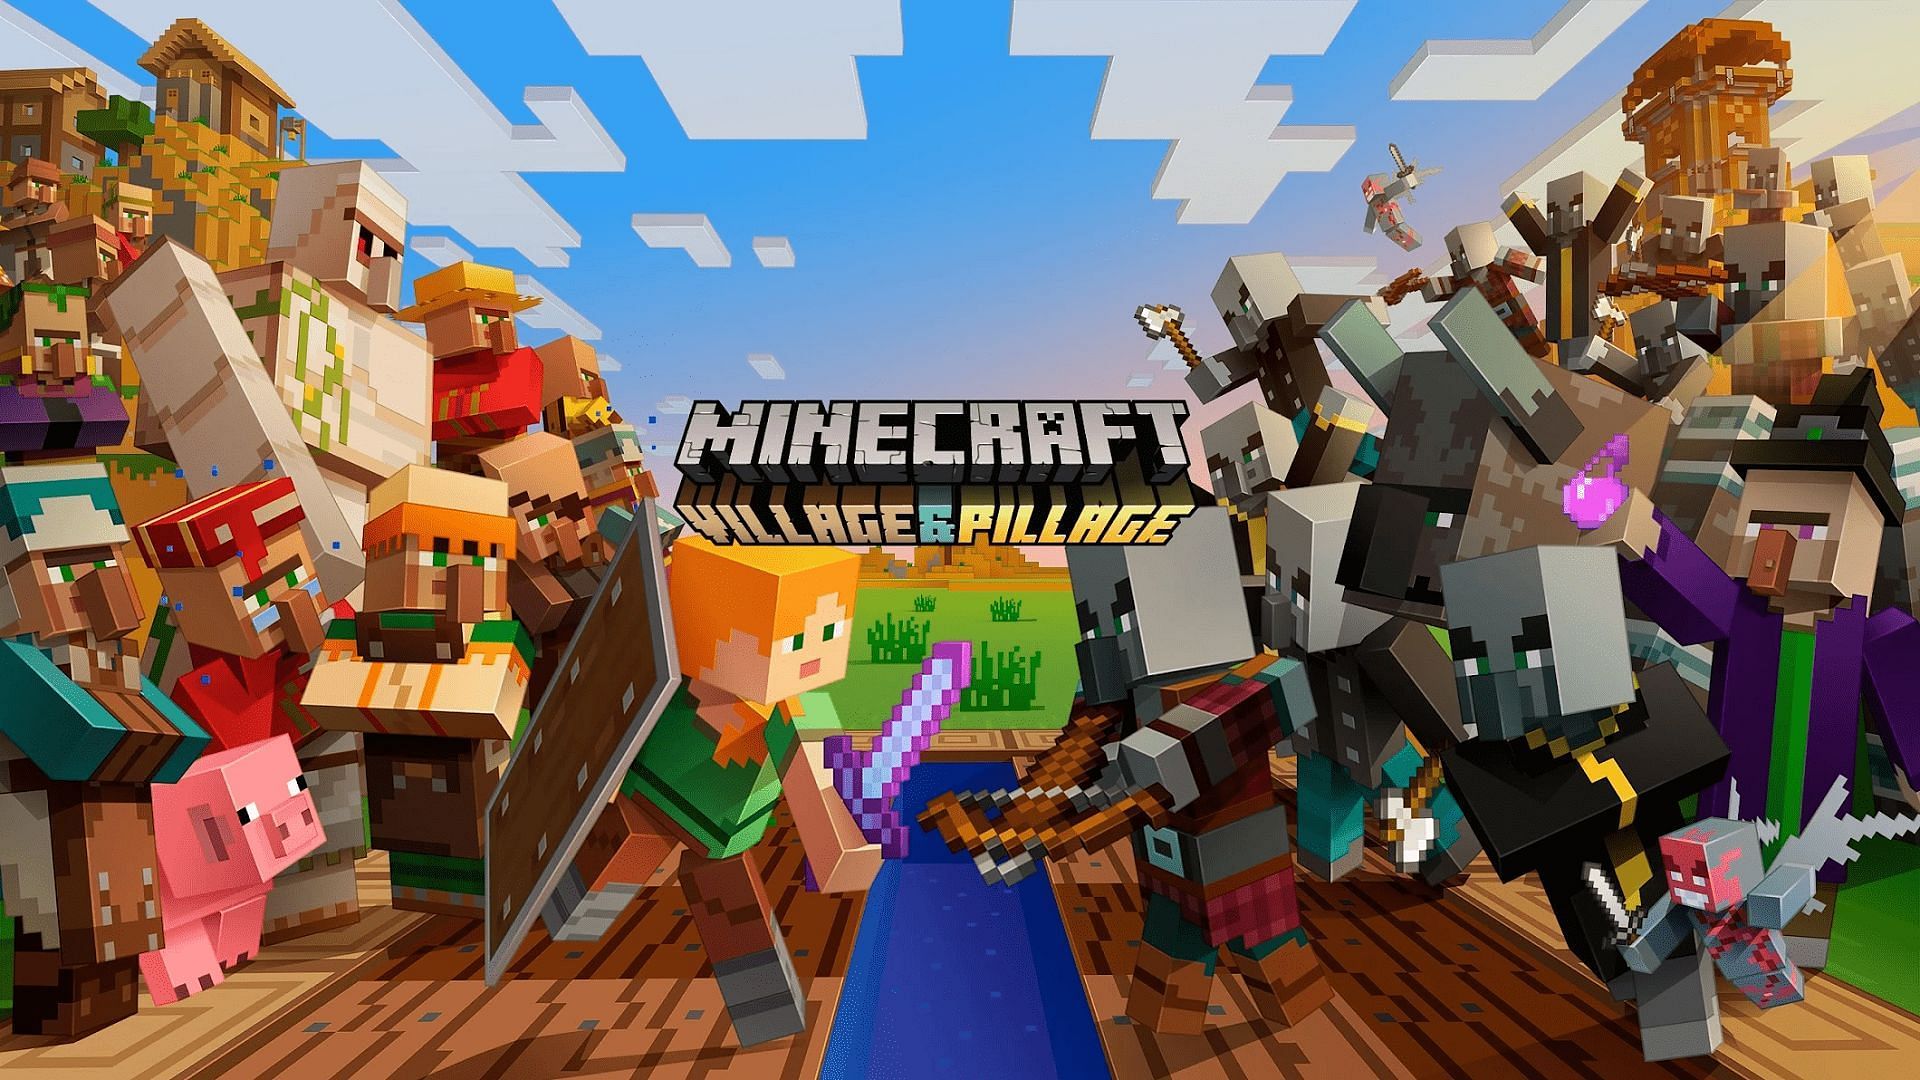 Village &amp; Pillage redefined villages and introduced very helpful items (Image via Mojang)